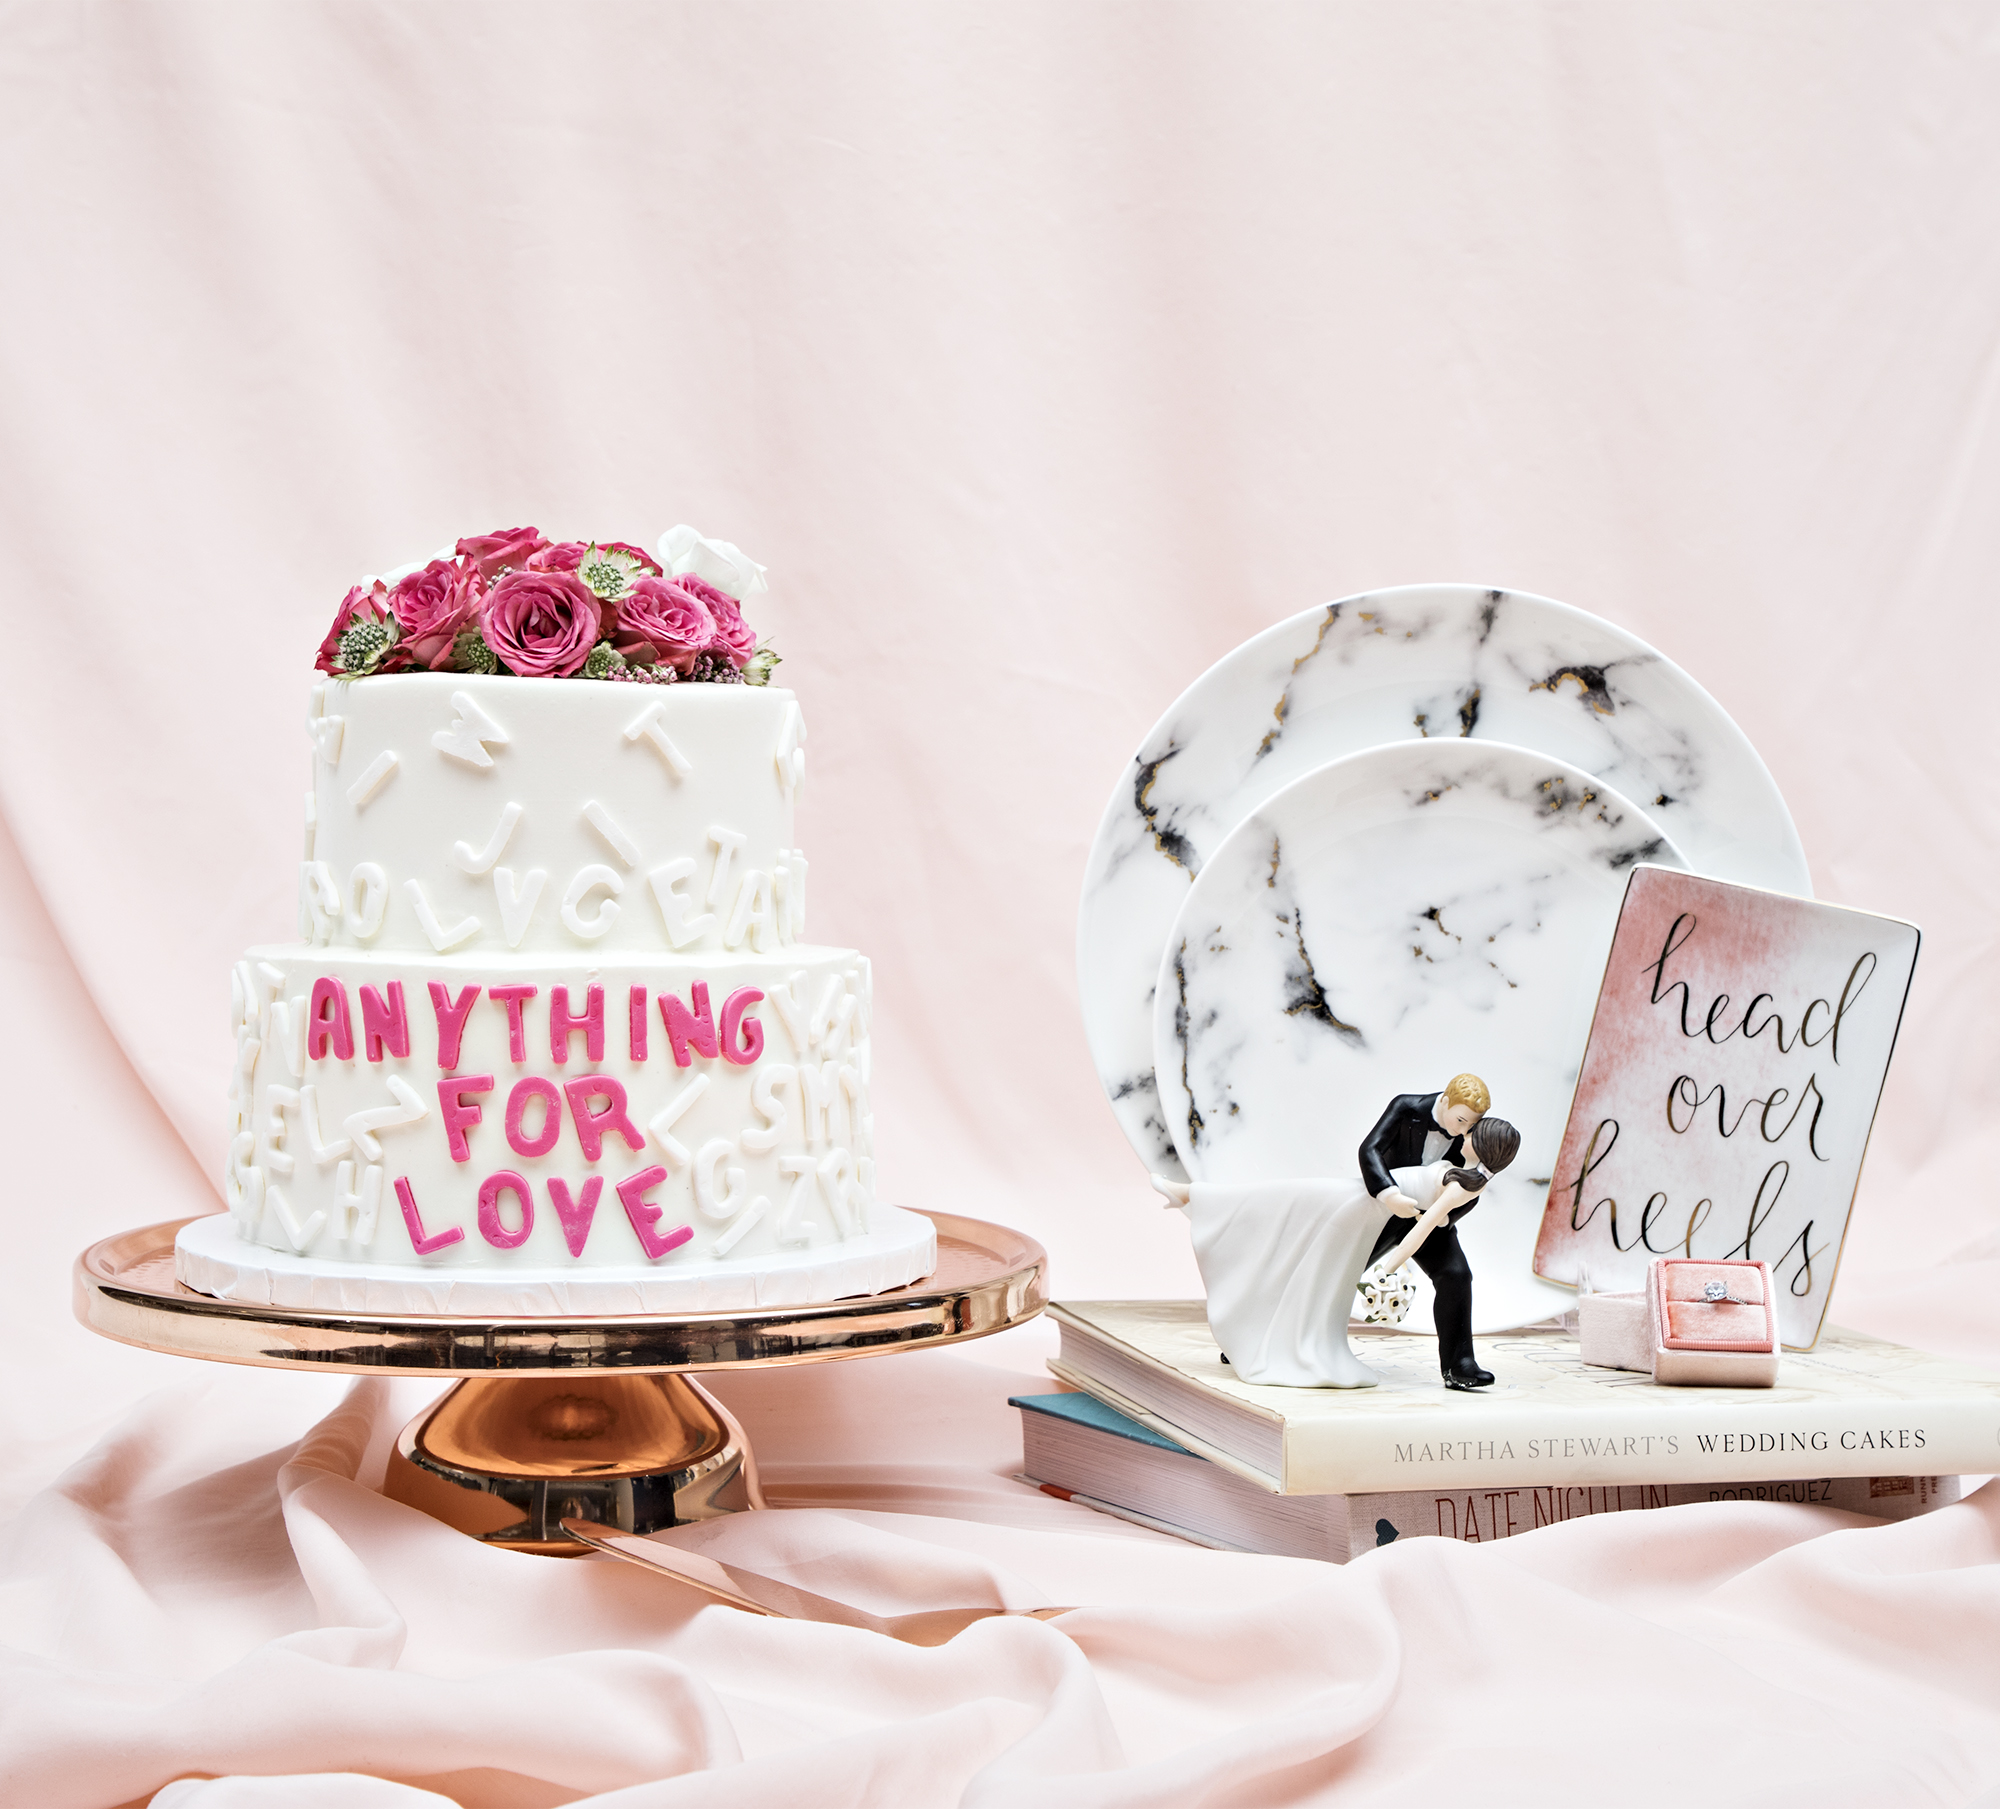 A wedding cake that reads "Anything For Love" next to two marble plates and a cake topper